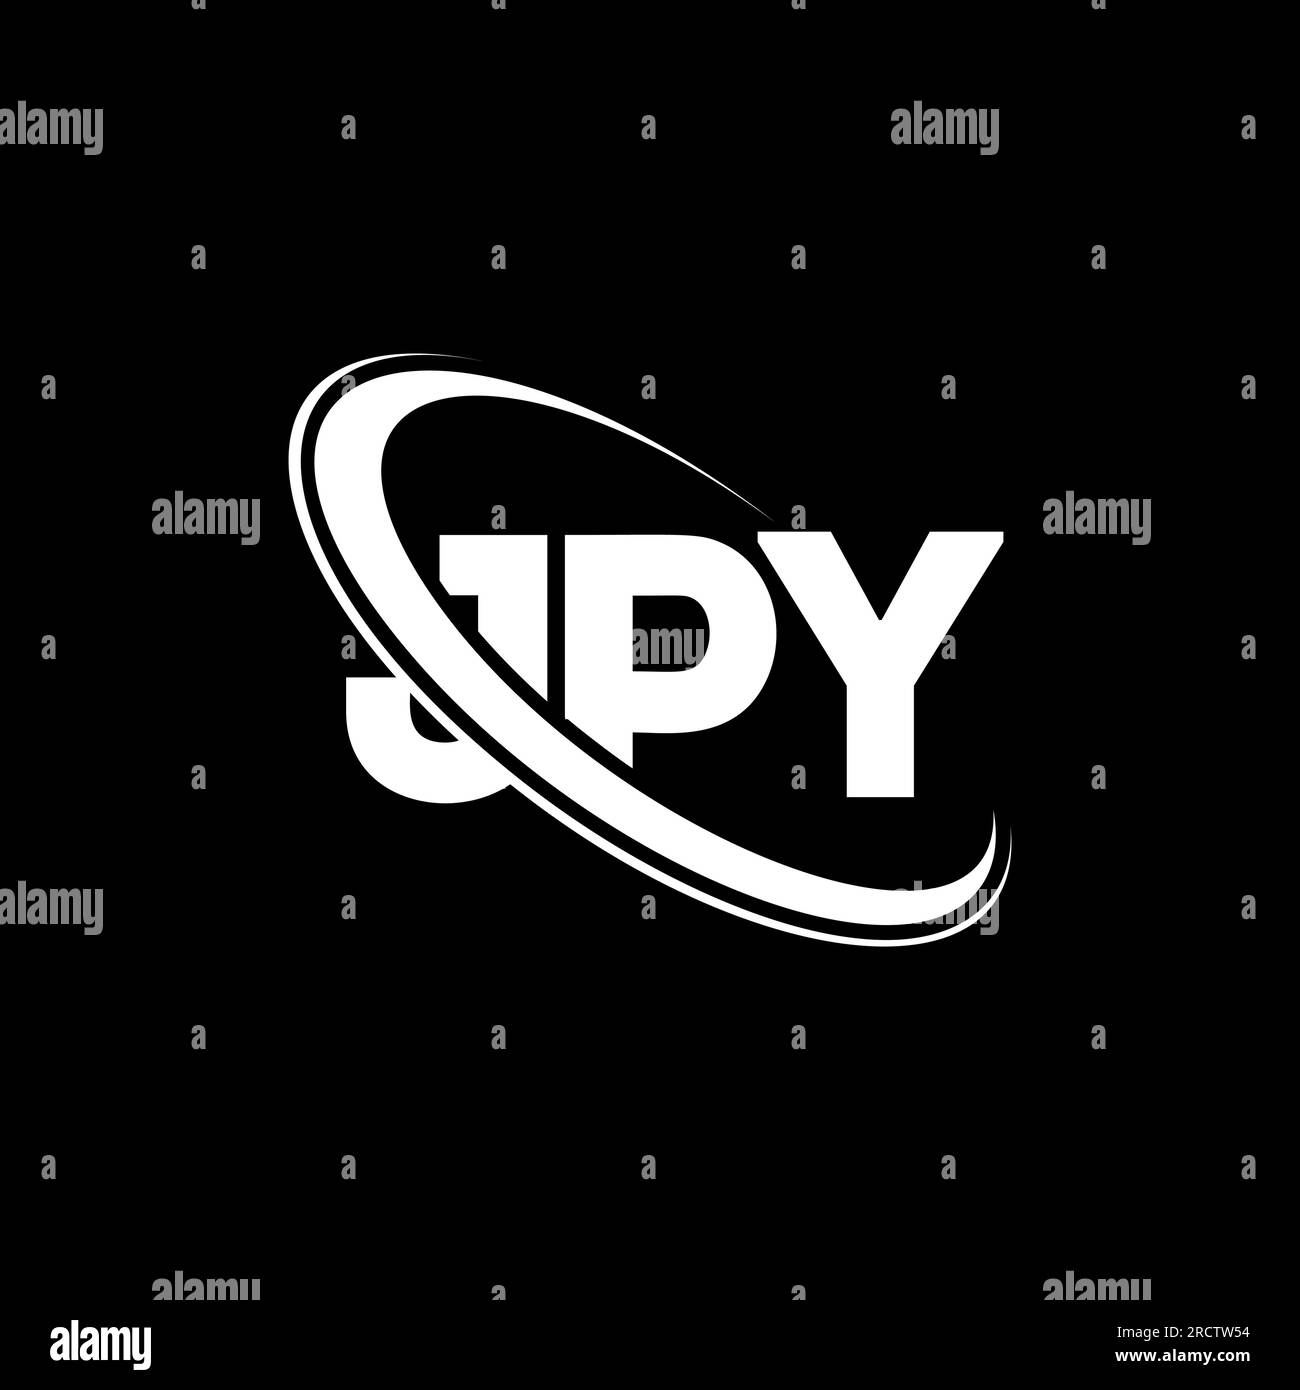 JPY logo. JPY letter. JPY letter logo design. Initials JPY logo linked with circle and uppercase monogram logo. JPY typography for technology, busines Stock Vector